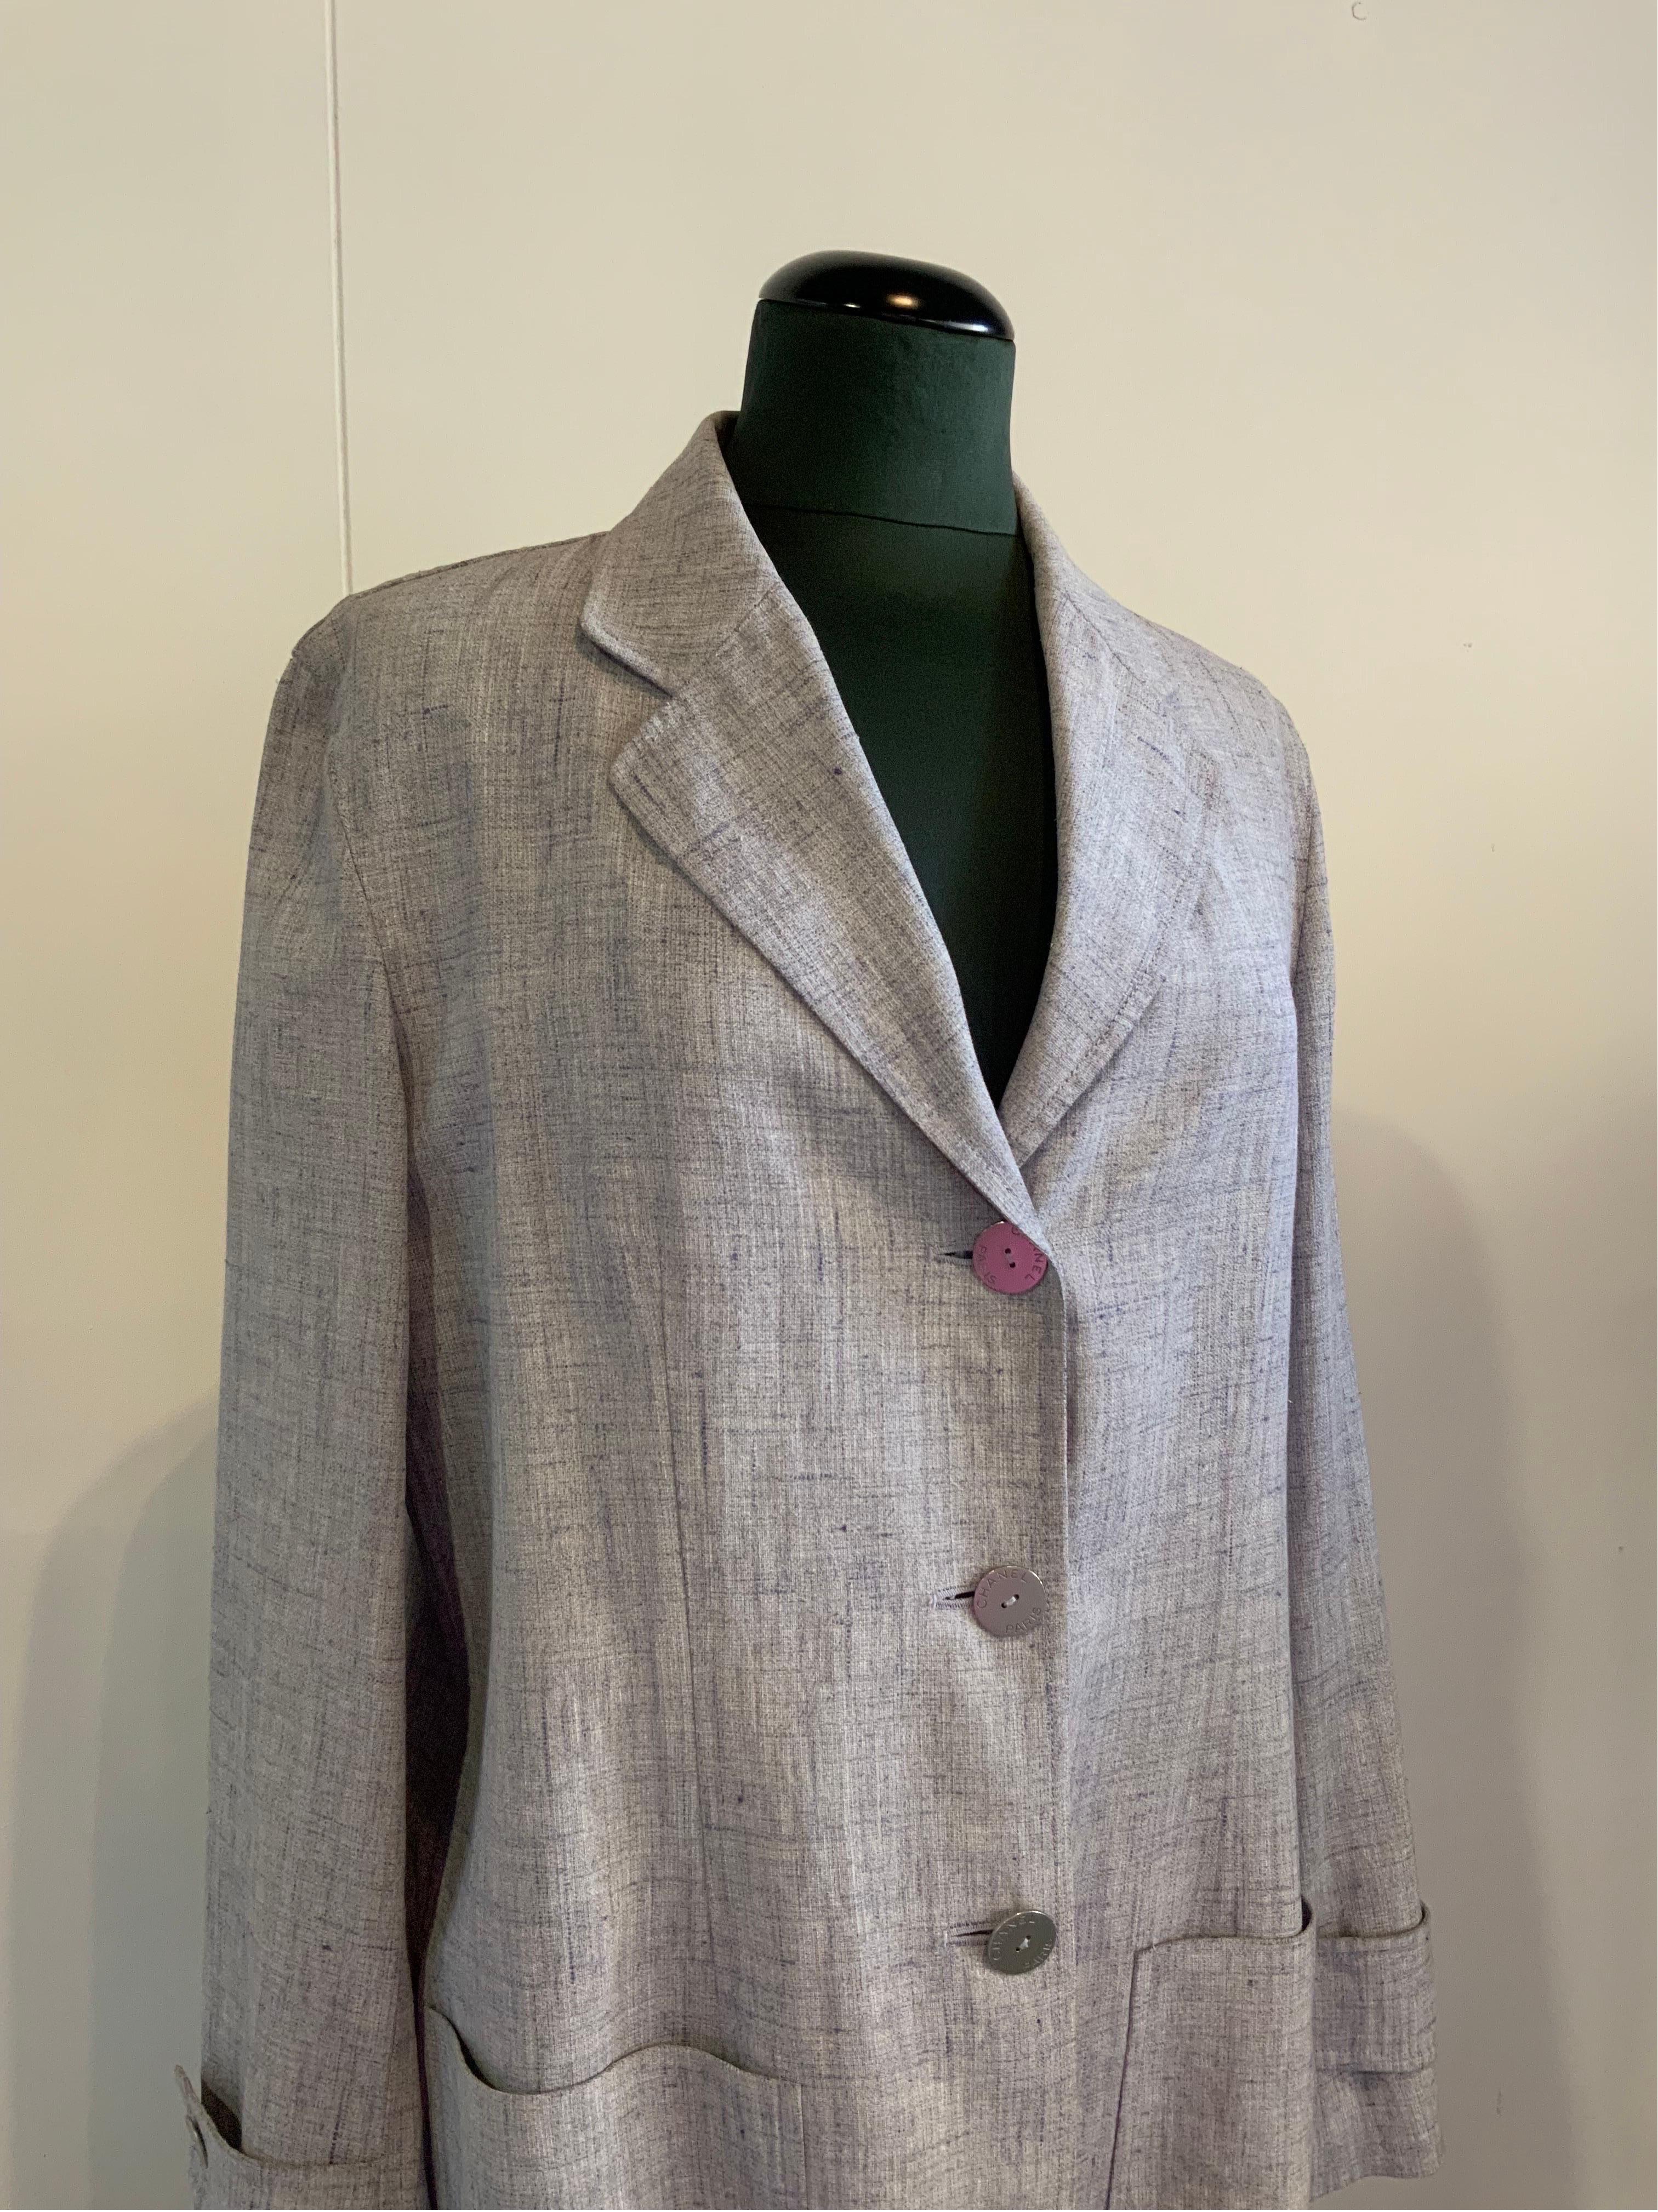 CHANEL IDENTIFICATION TRENCH COAT.
One of the 50 pieces that according to Karl Lagerfeld identifies the style of the Parisian maison. Men's cut.
100% linen. In shades of gray and blue that mix together.
Silver and branded buttons.
French size 38